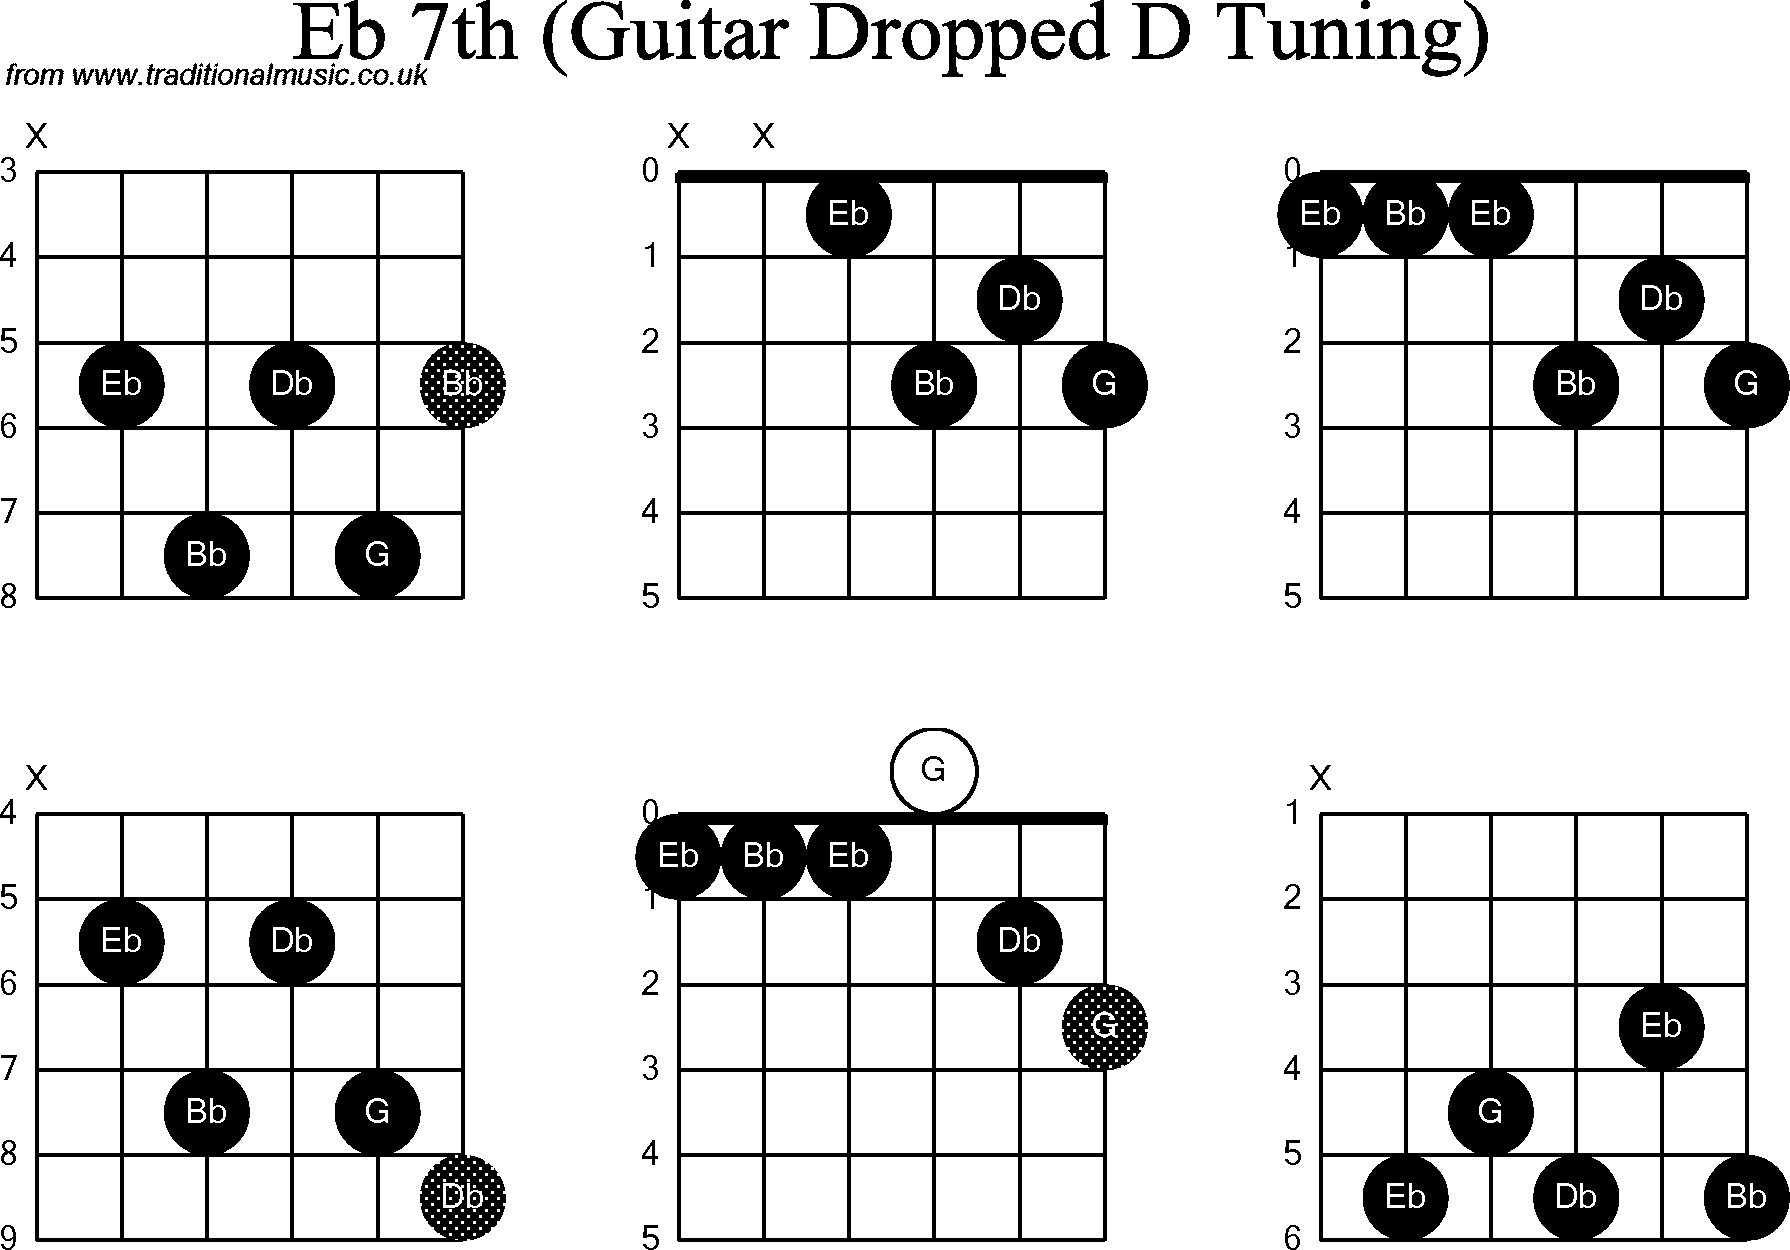 Chord diagrams for dropped D Guitar(DADGBE), Eb7th